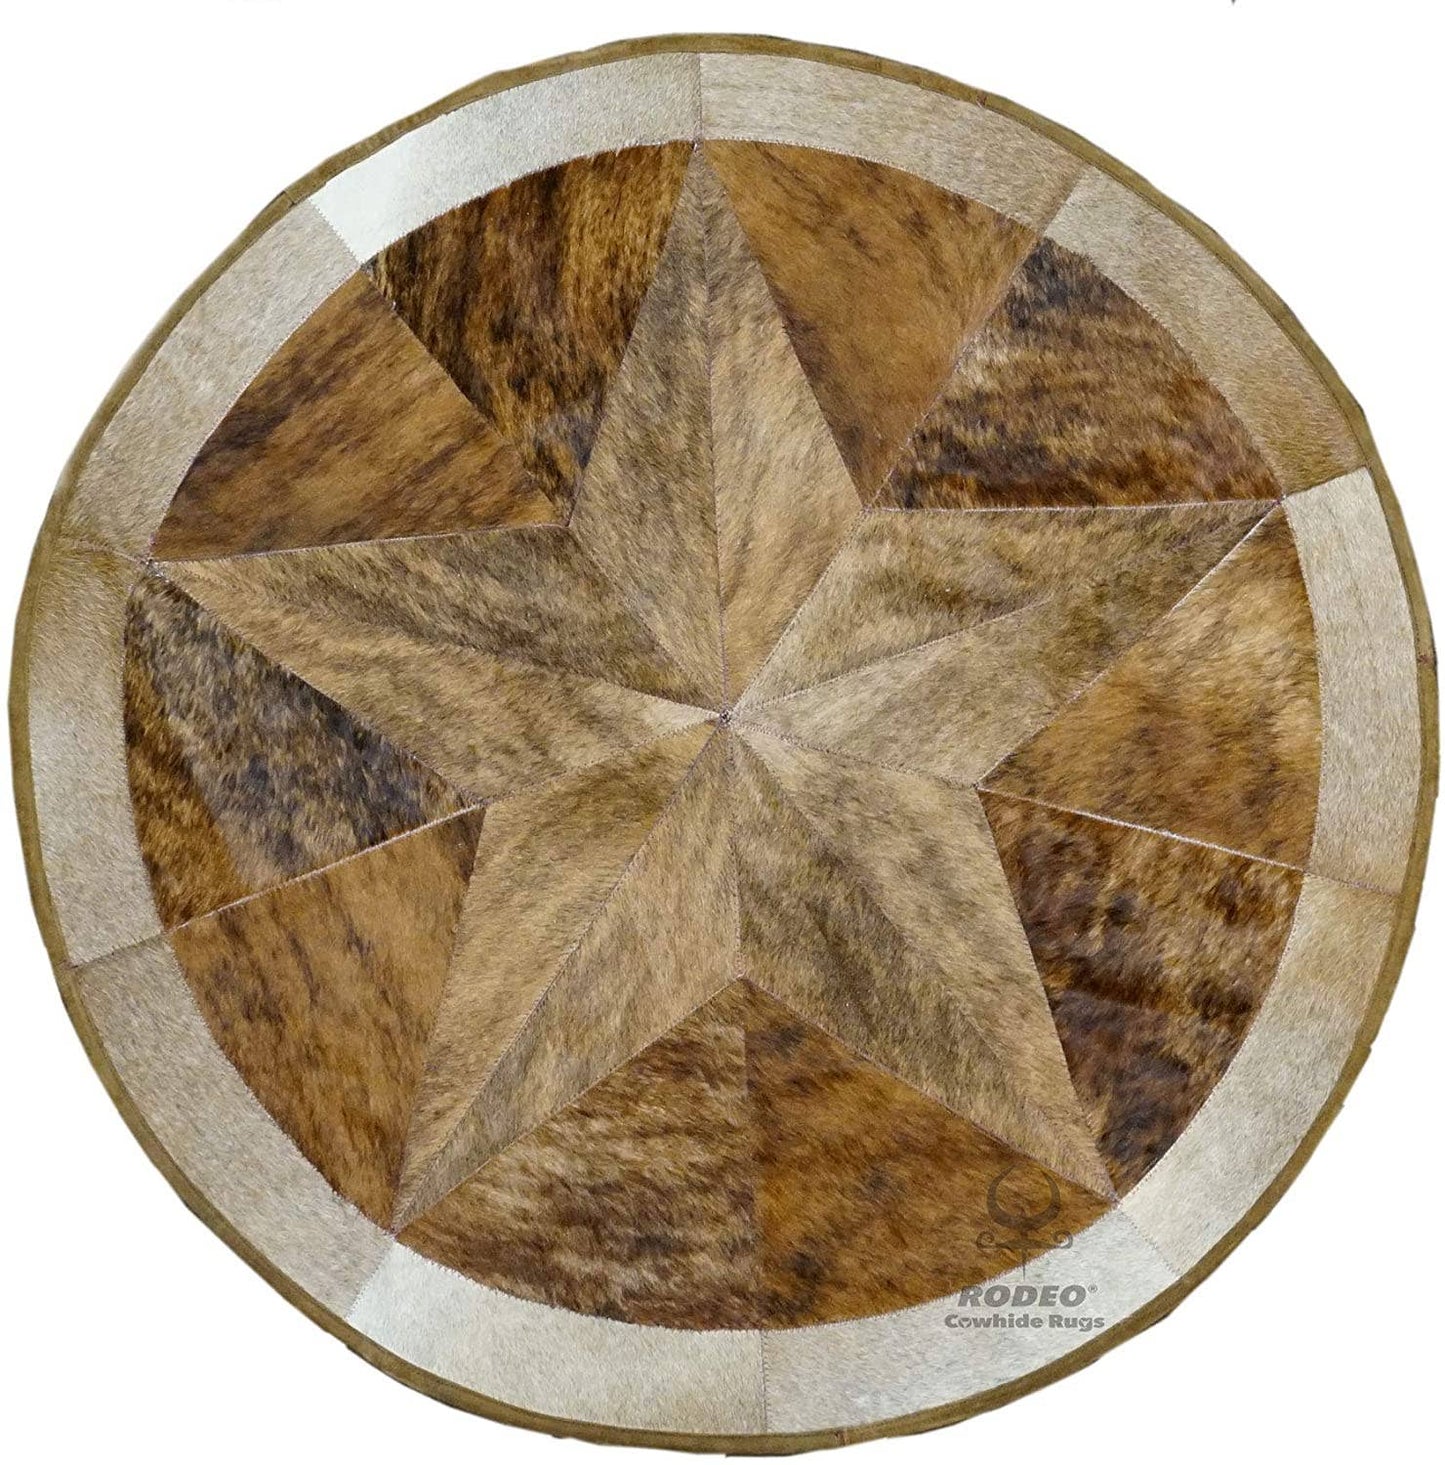 RODEO Texas Star Patch Work Cowhide Rug